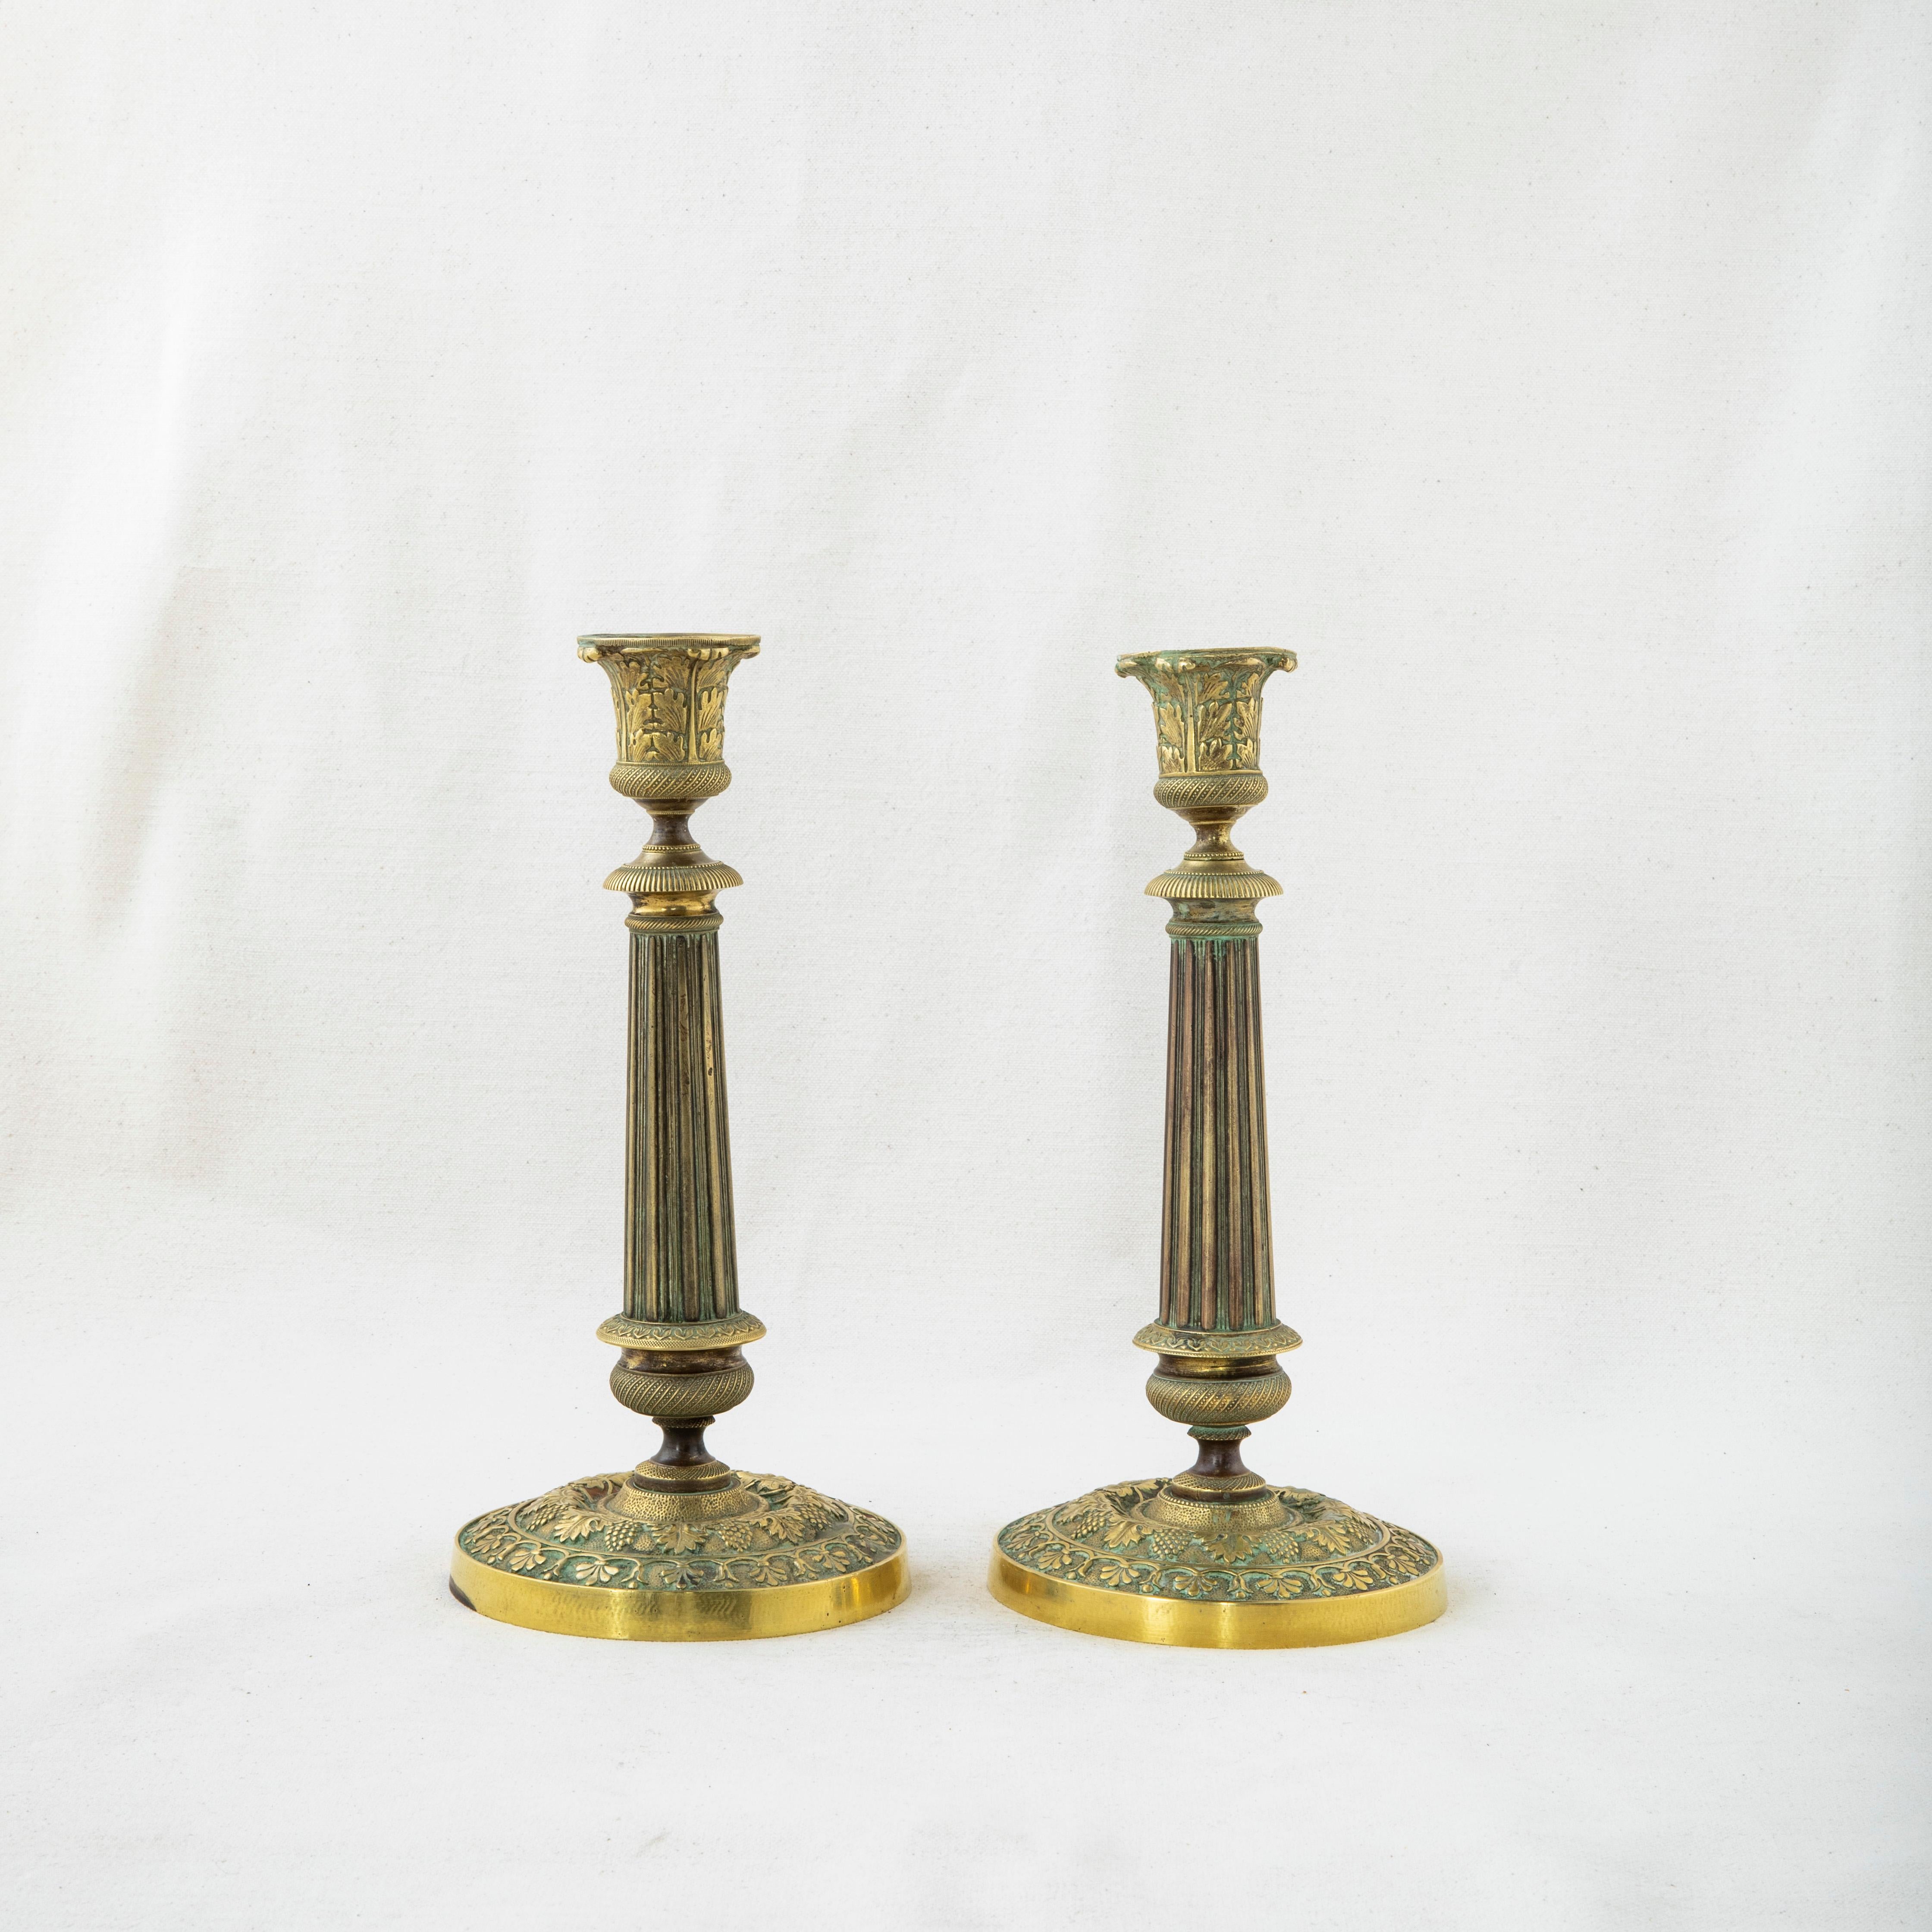 This pair of late nineteenth century French bronze candlesticks features a grape and grape leaf motif and fluting. Each candlestick measures 9.25 inches tall by 4.5 inches in diameter at the base. The candlesticks are fitted with attached bobeches